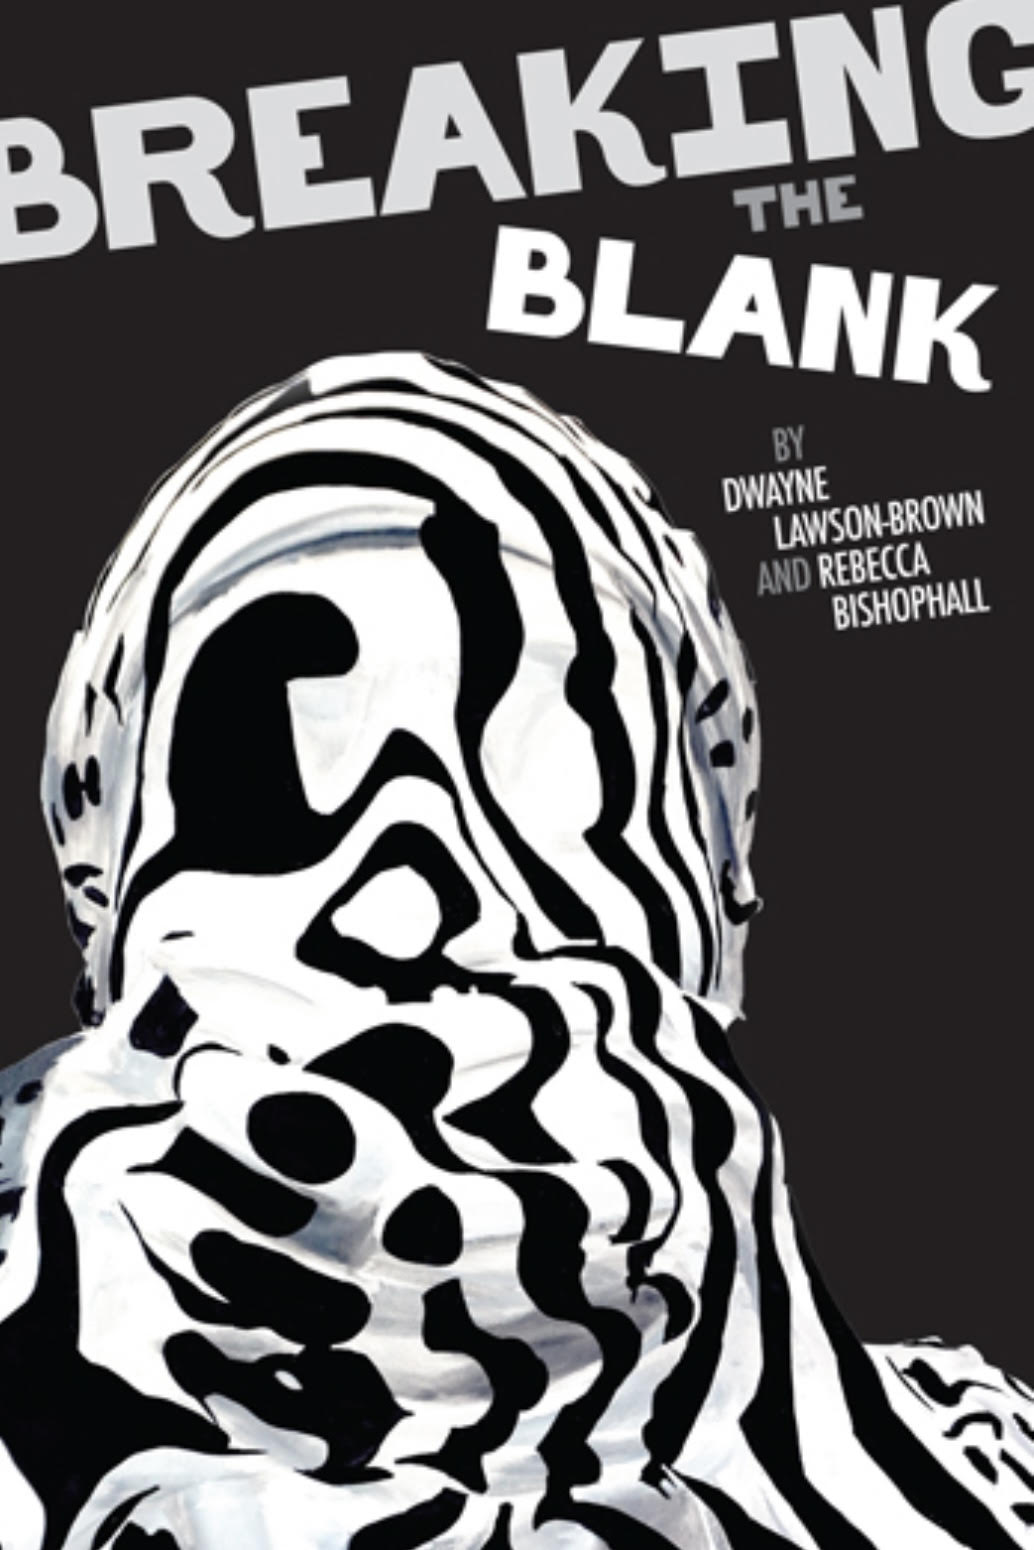 Book Cover: Breaking The Blank by Dwayne Lawson-Brown and Rebecca BishopHall